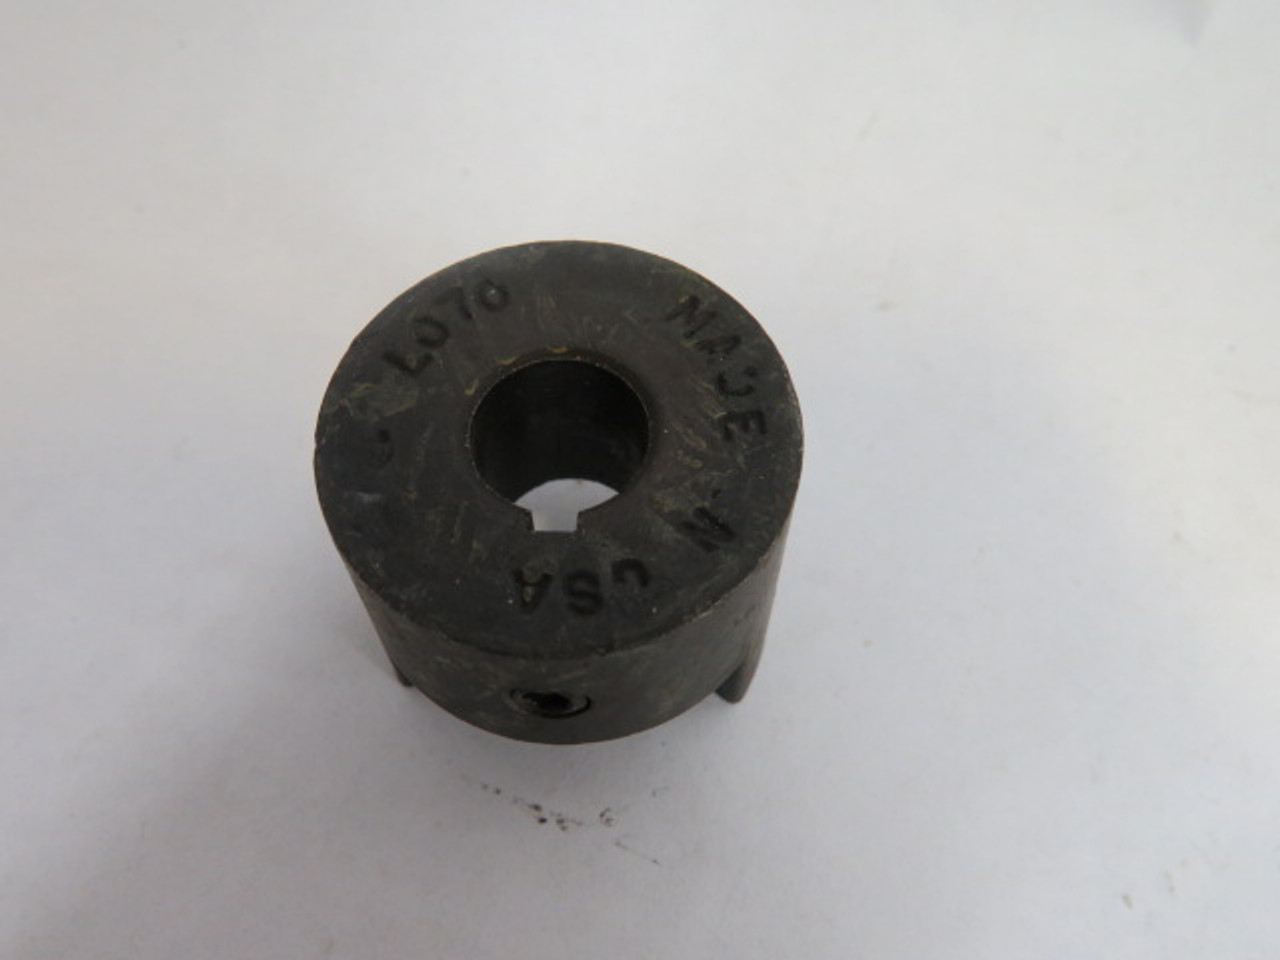 Master Drive L070-1/2 Jaw Coupling w/ 1/8" Keyway 1/2" Bore USED